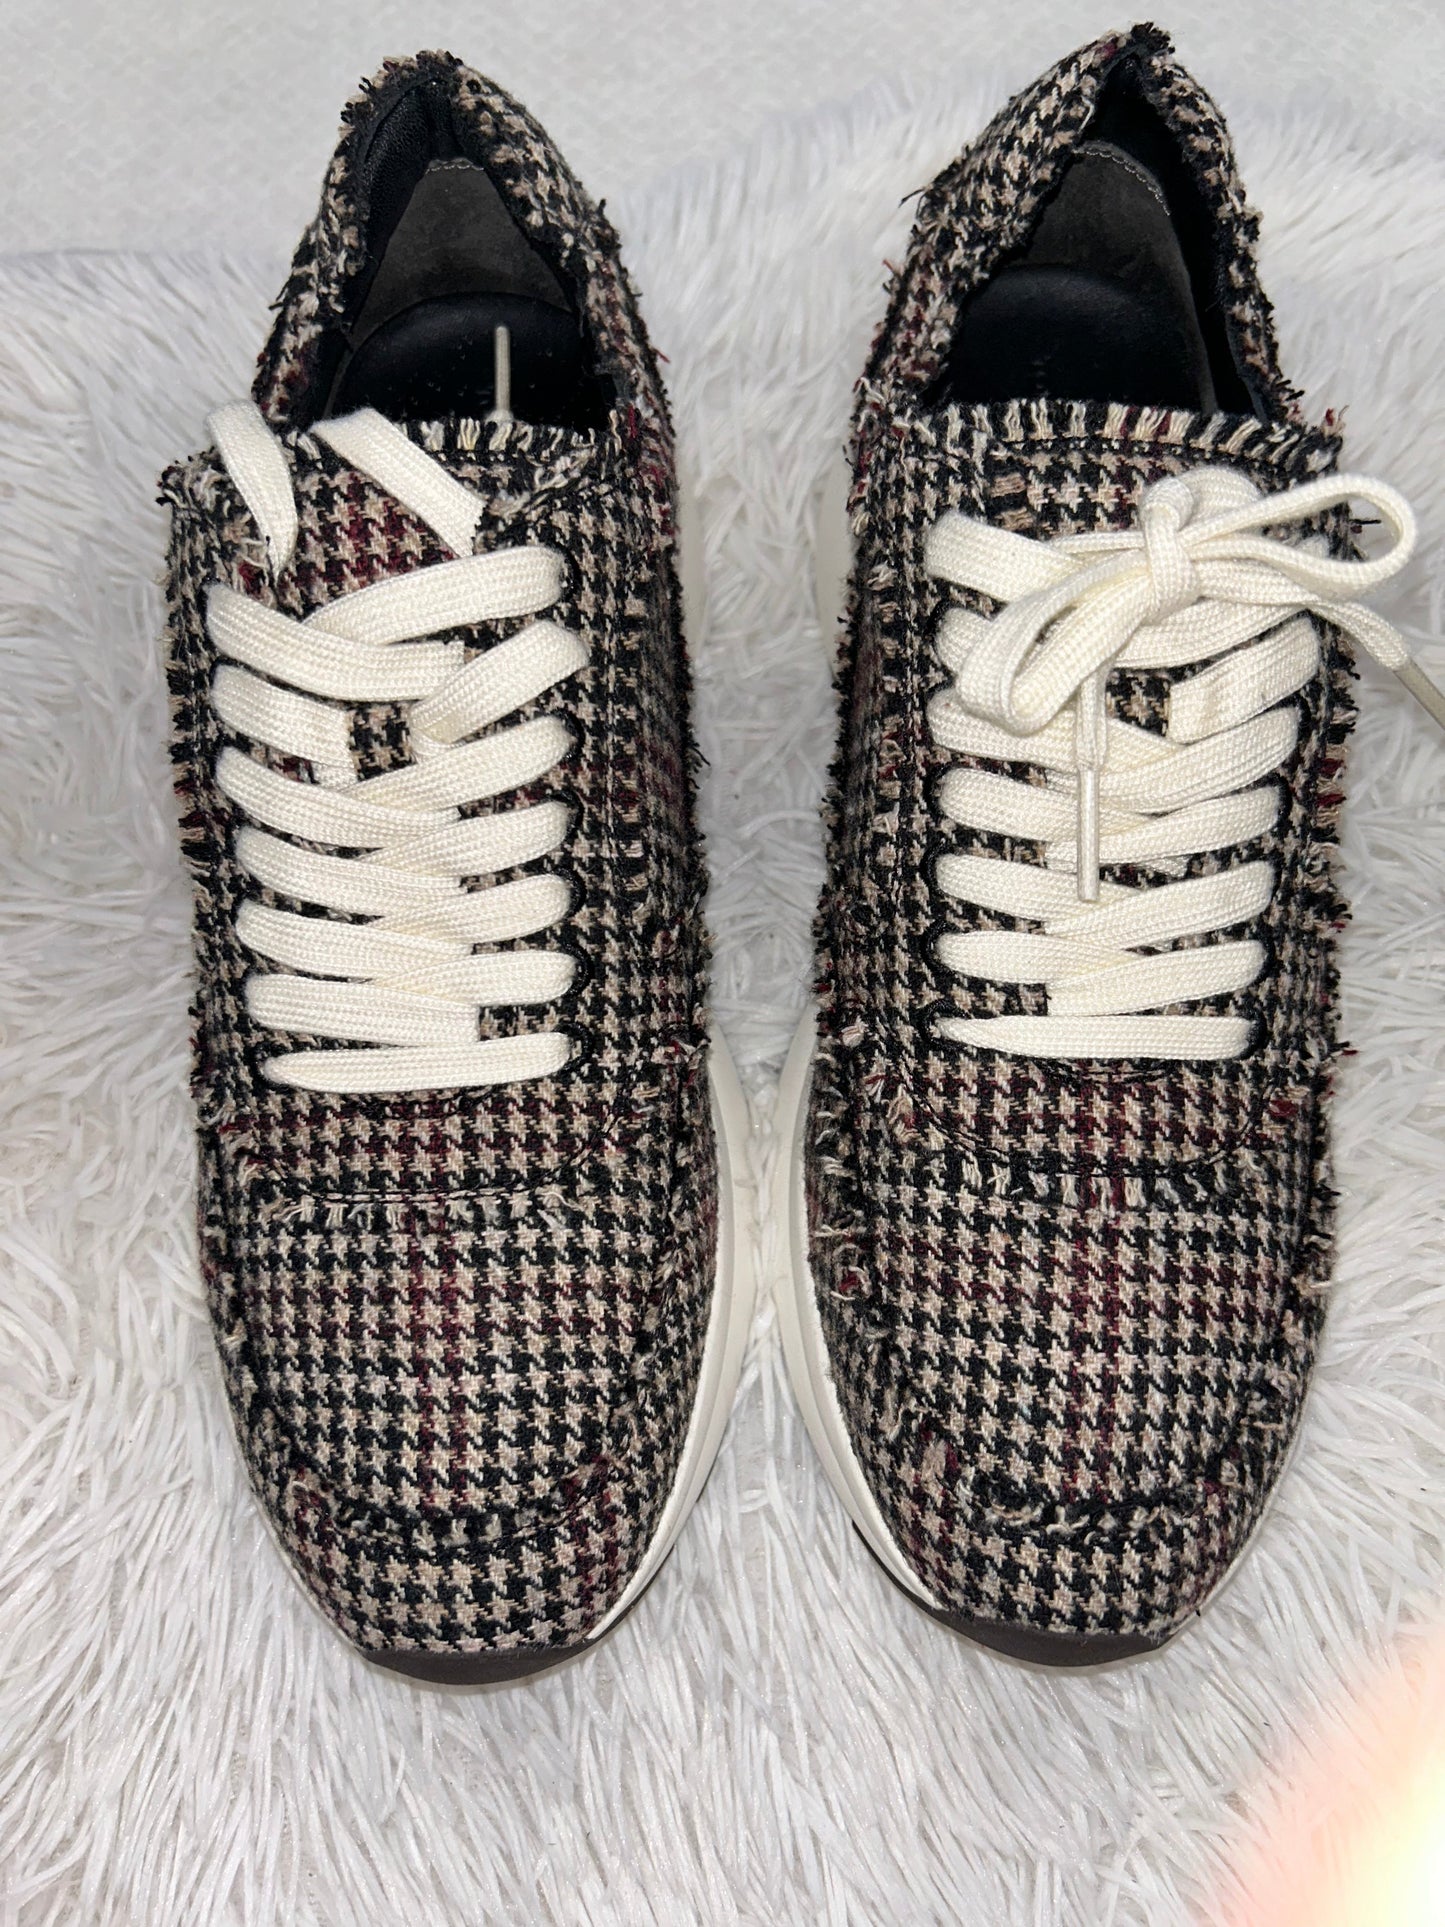 Houndstooth Shoes Sneakers Tory Burch, Size 11